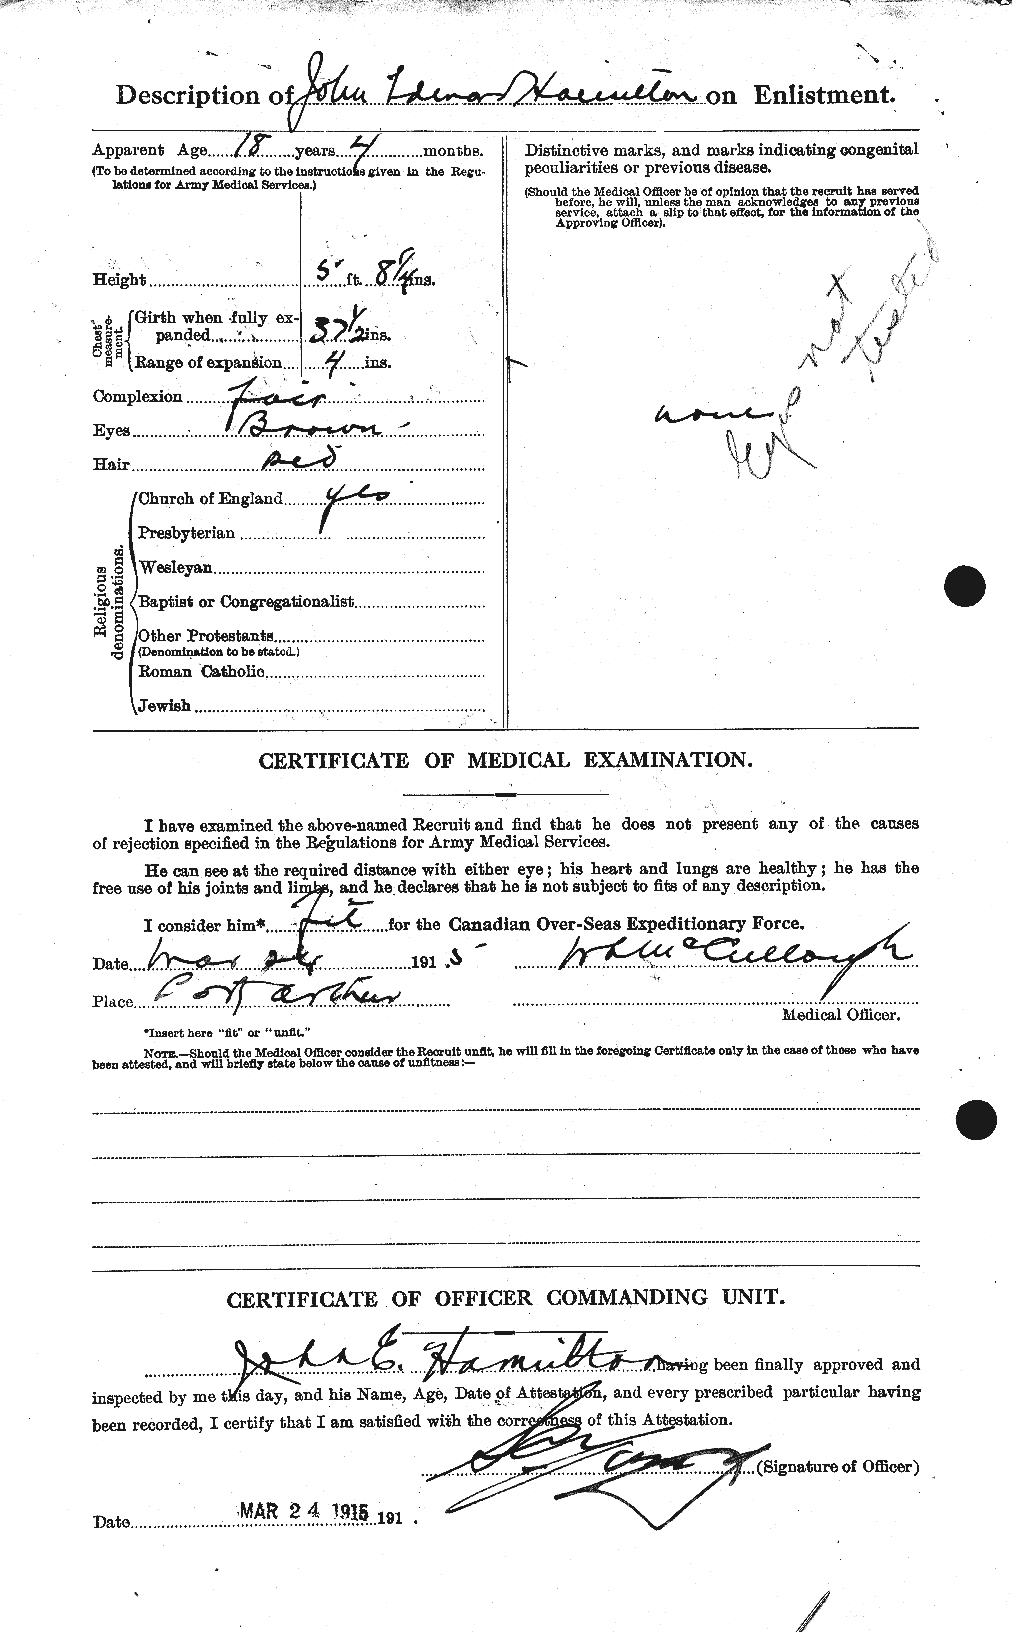 Personnel Records of the First World War - CEF 373081b